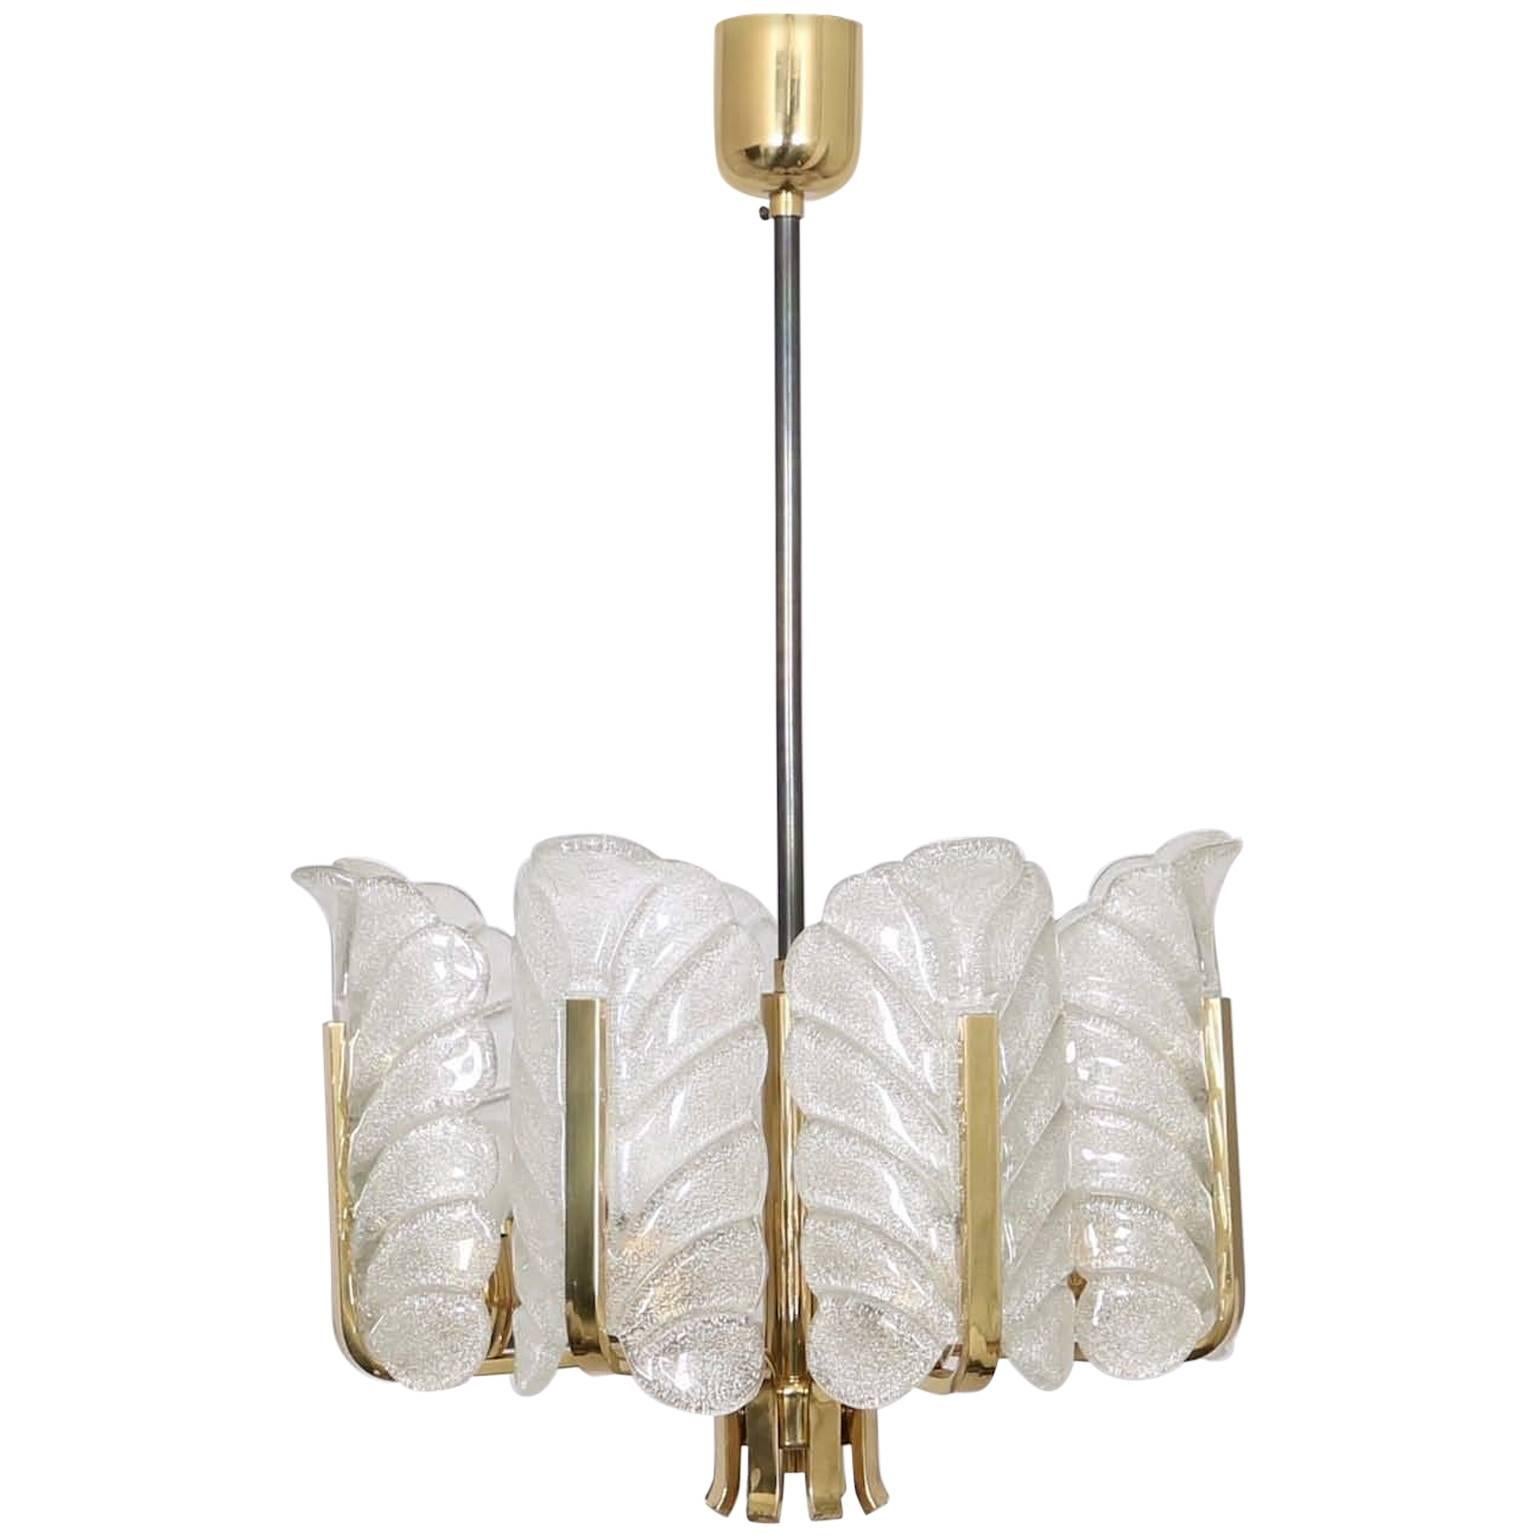 Carl Fagerlund for Orrefors Chandelier with Textured Glass Leaves